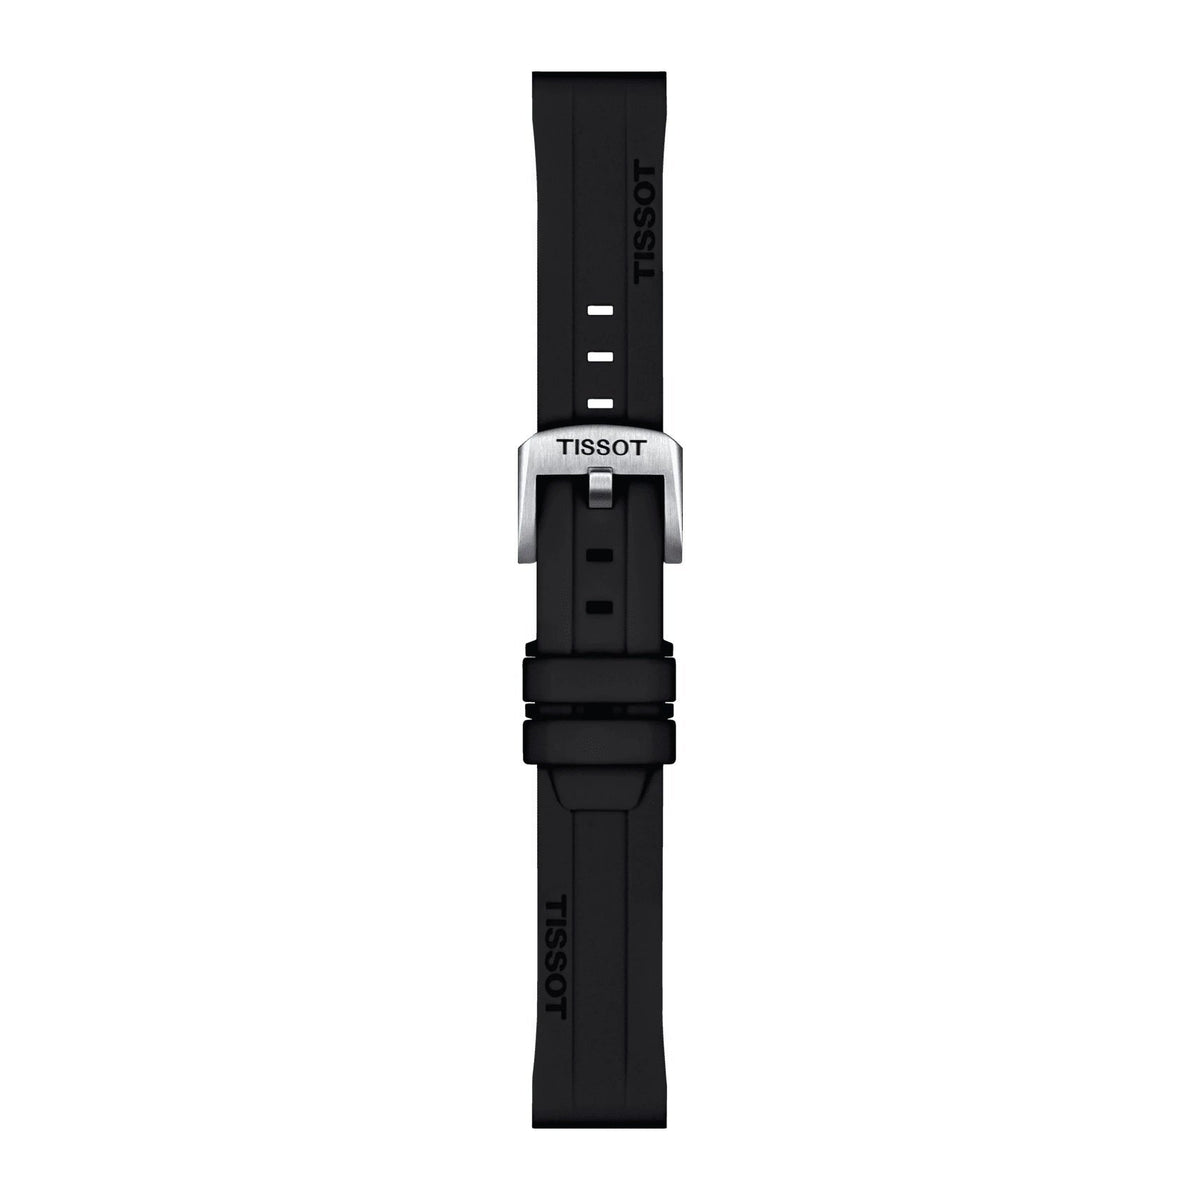 Official Tissot BLACK SILICONE strap ANSA 18 MM T852047455